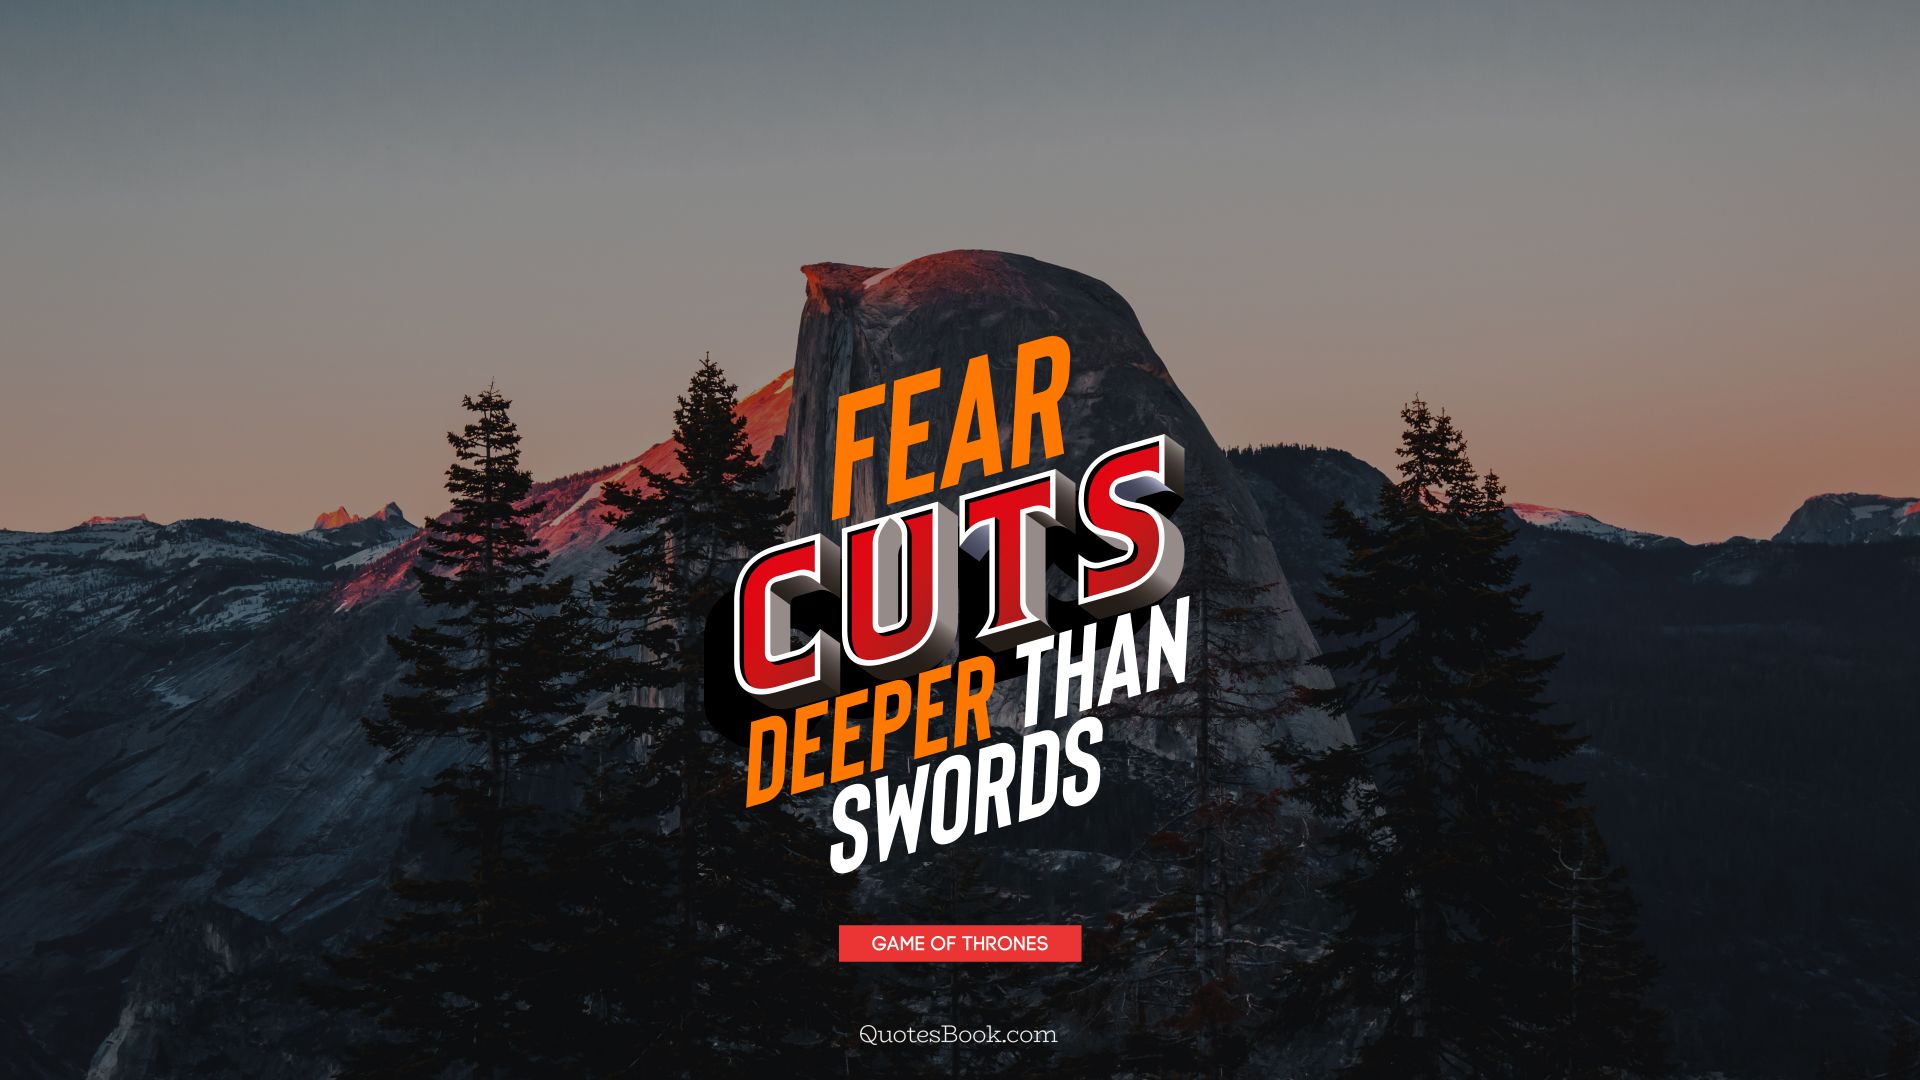 Fear cuts deeper than swords. - Quote by George R.R. Martin